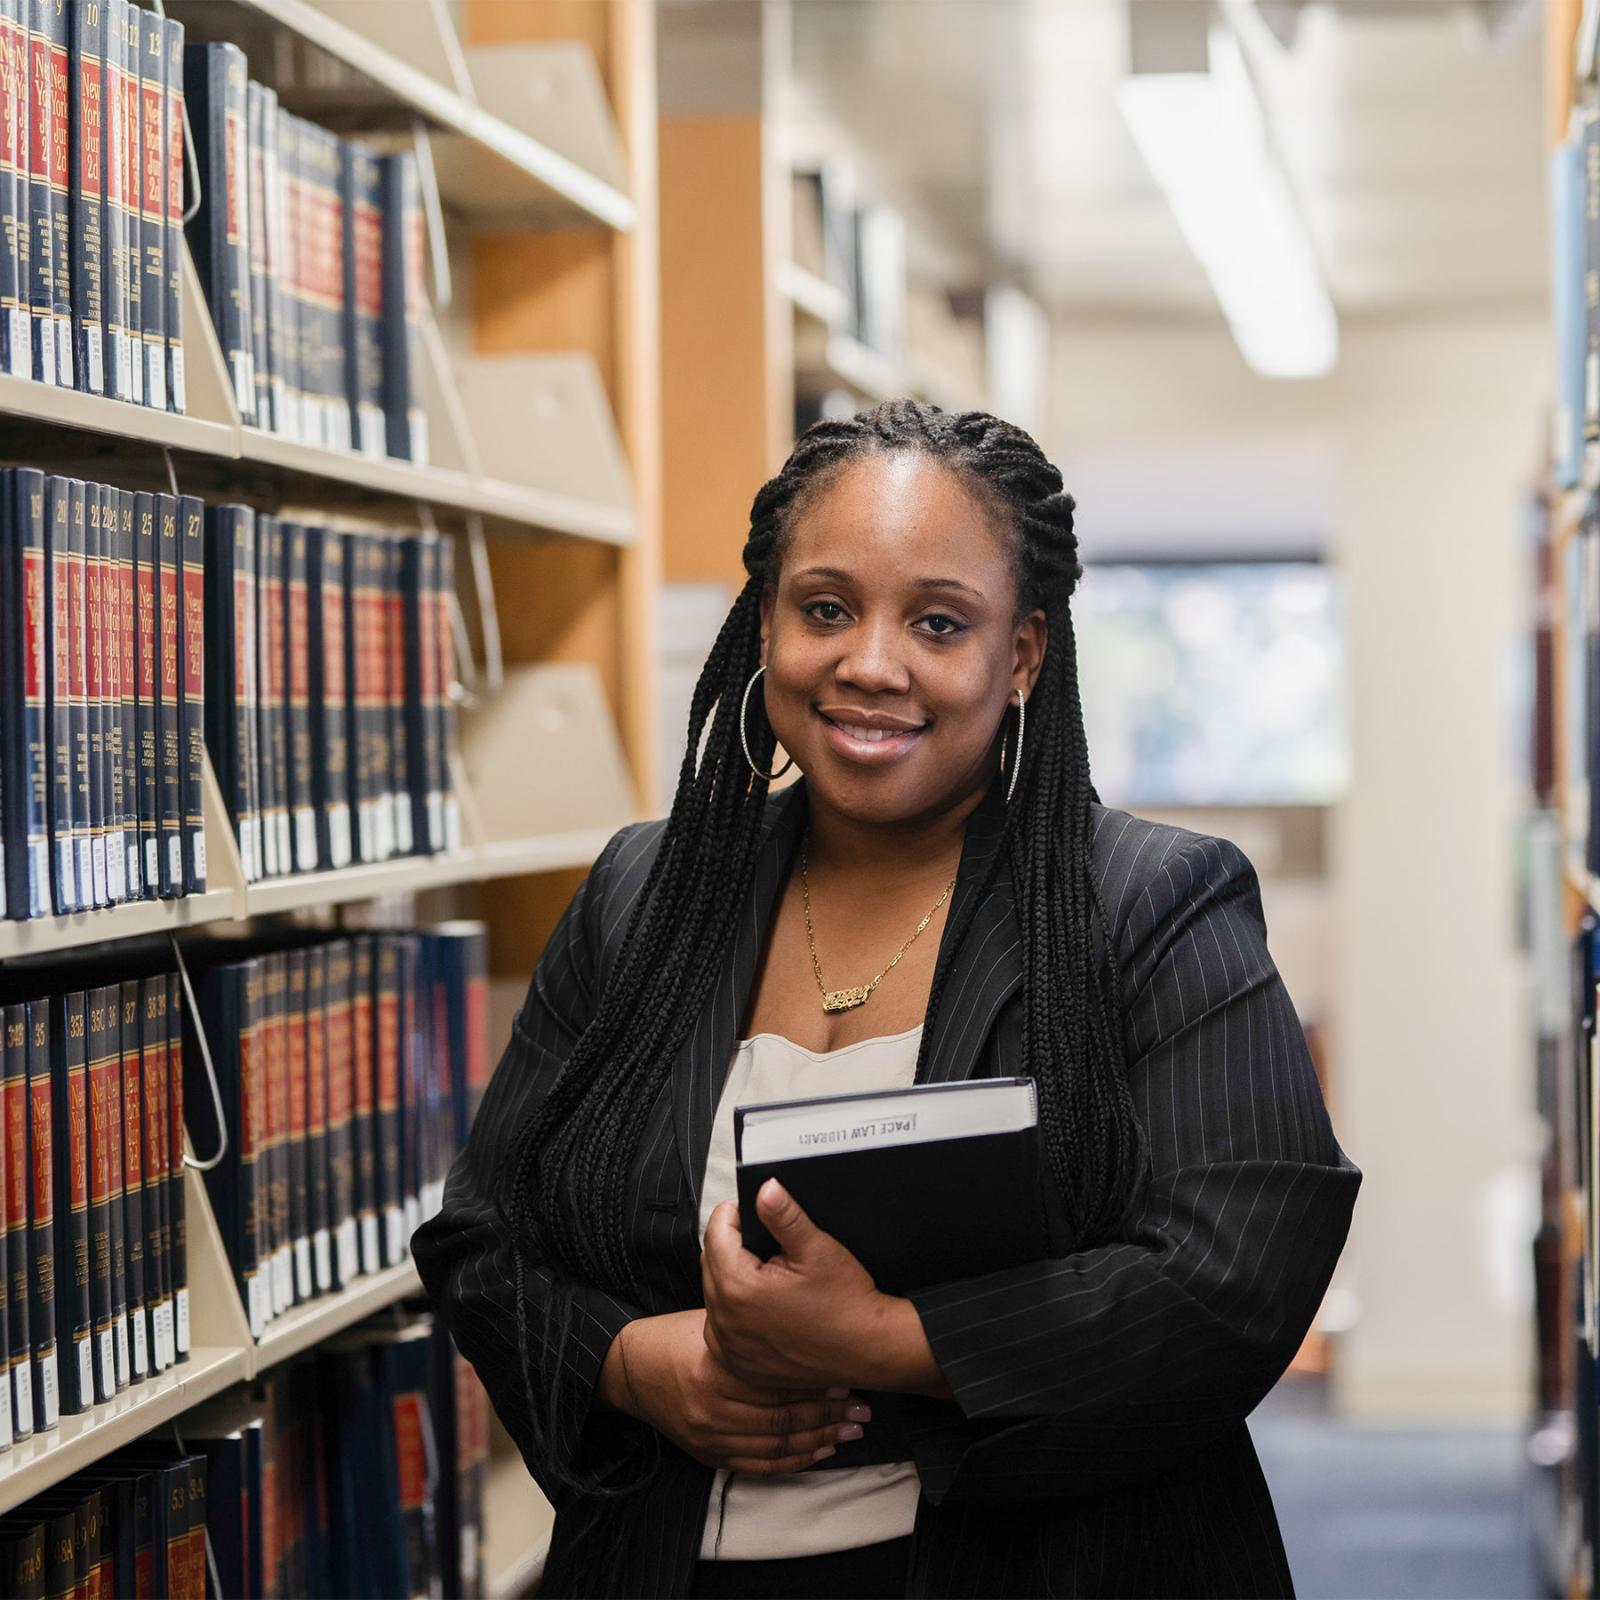 Female student standing in the law library, holding a book and smiling at the camera.